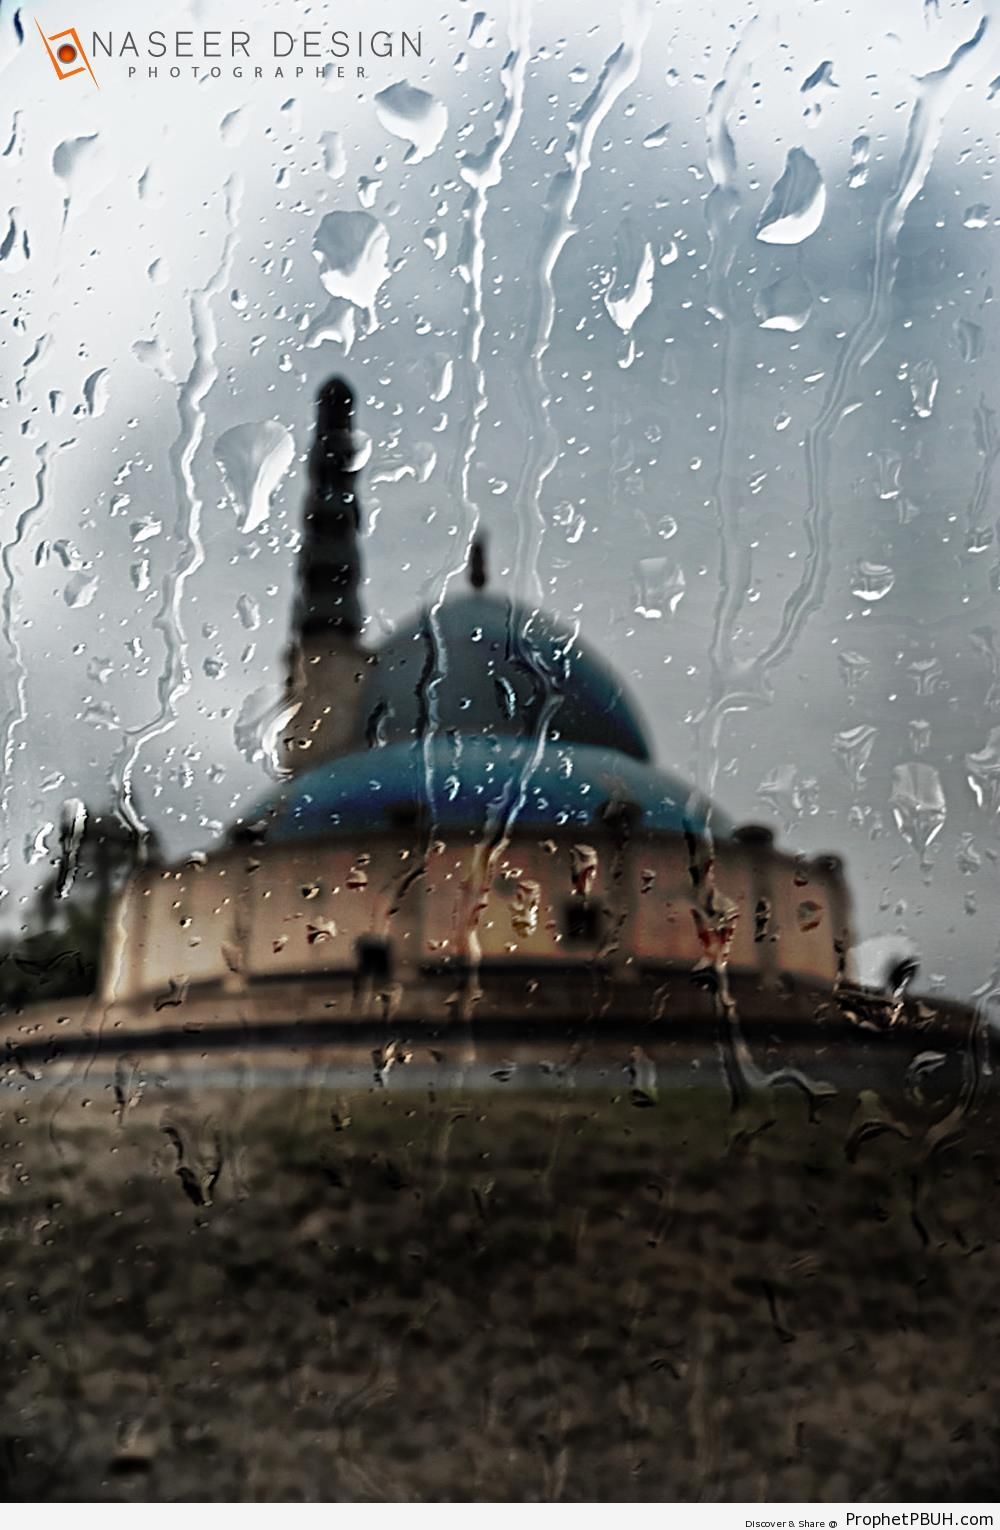 View of Mosque From Behind Wet Glass - Islamic Architecture -Picture